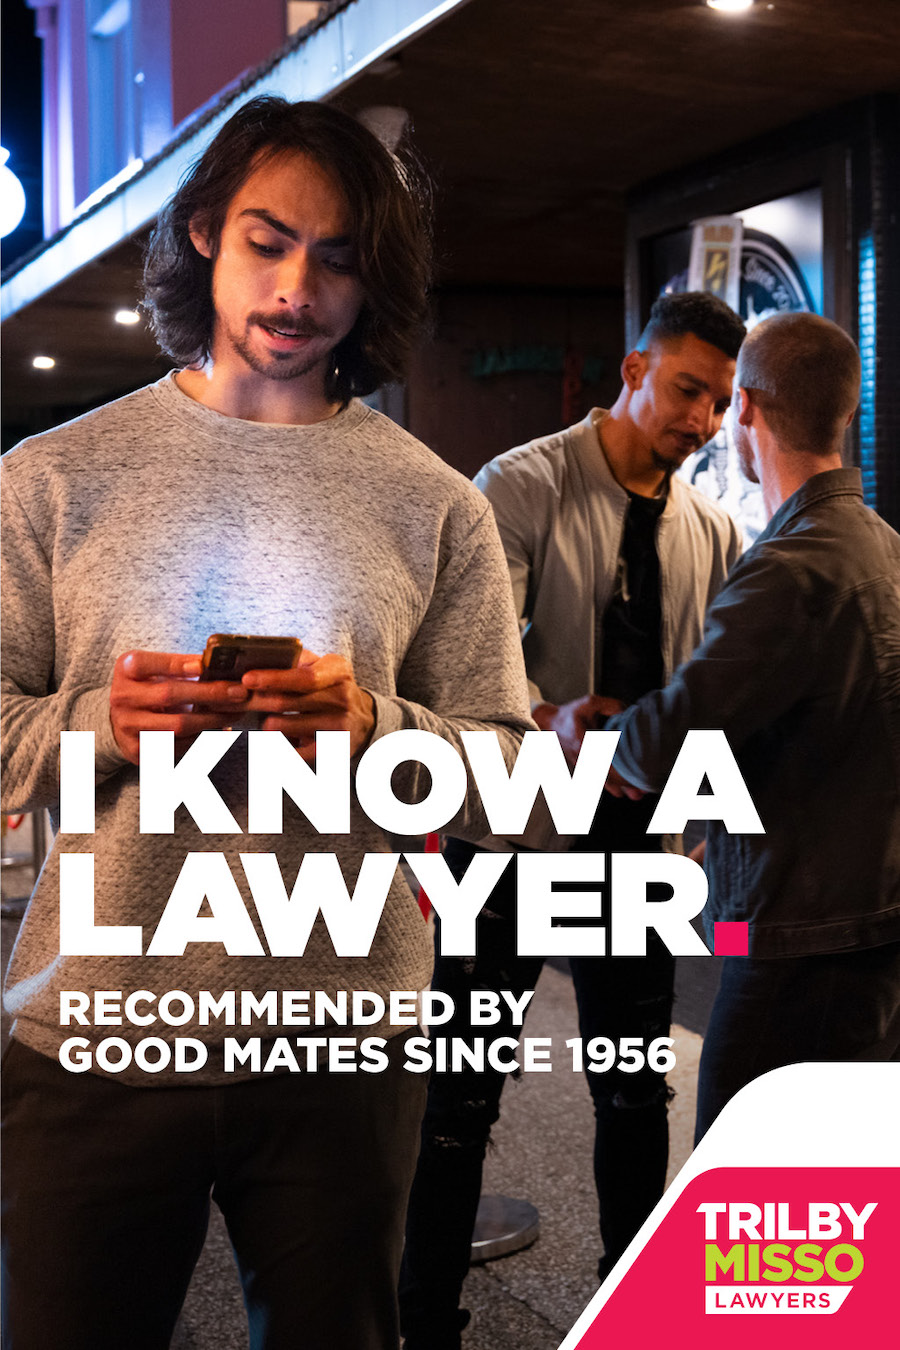 Trilby Misso launches new ‘I Know A Lawyer’ brand campaign via Rumble Strategic Creative